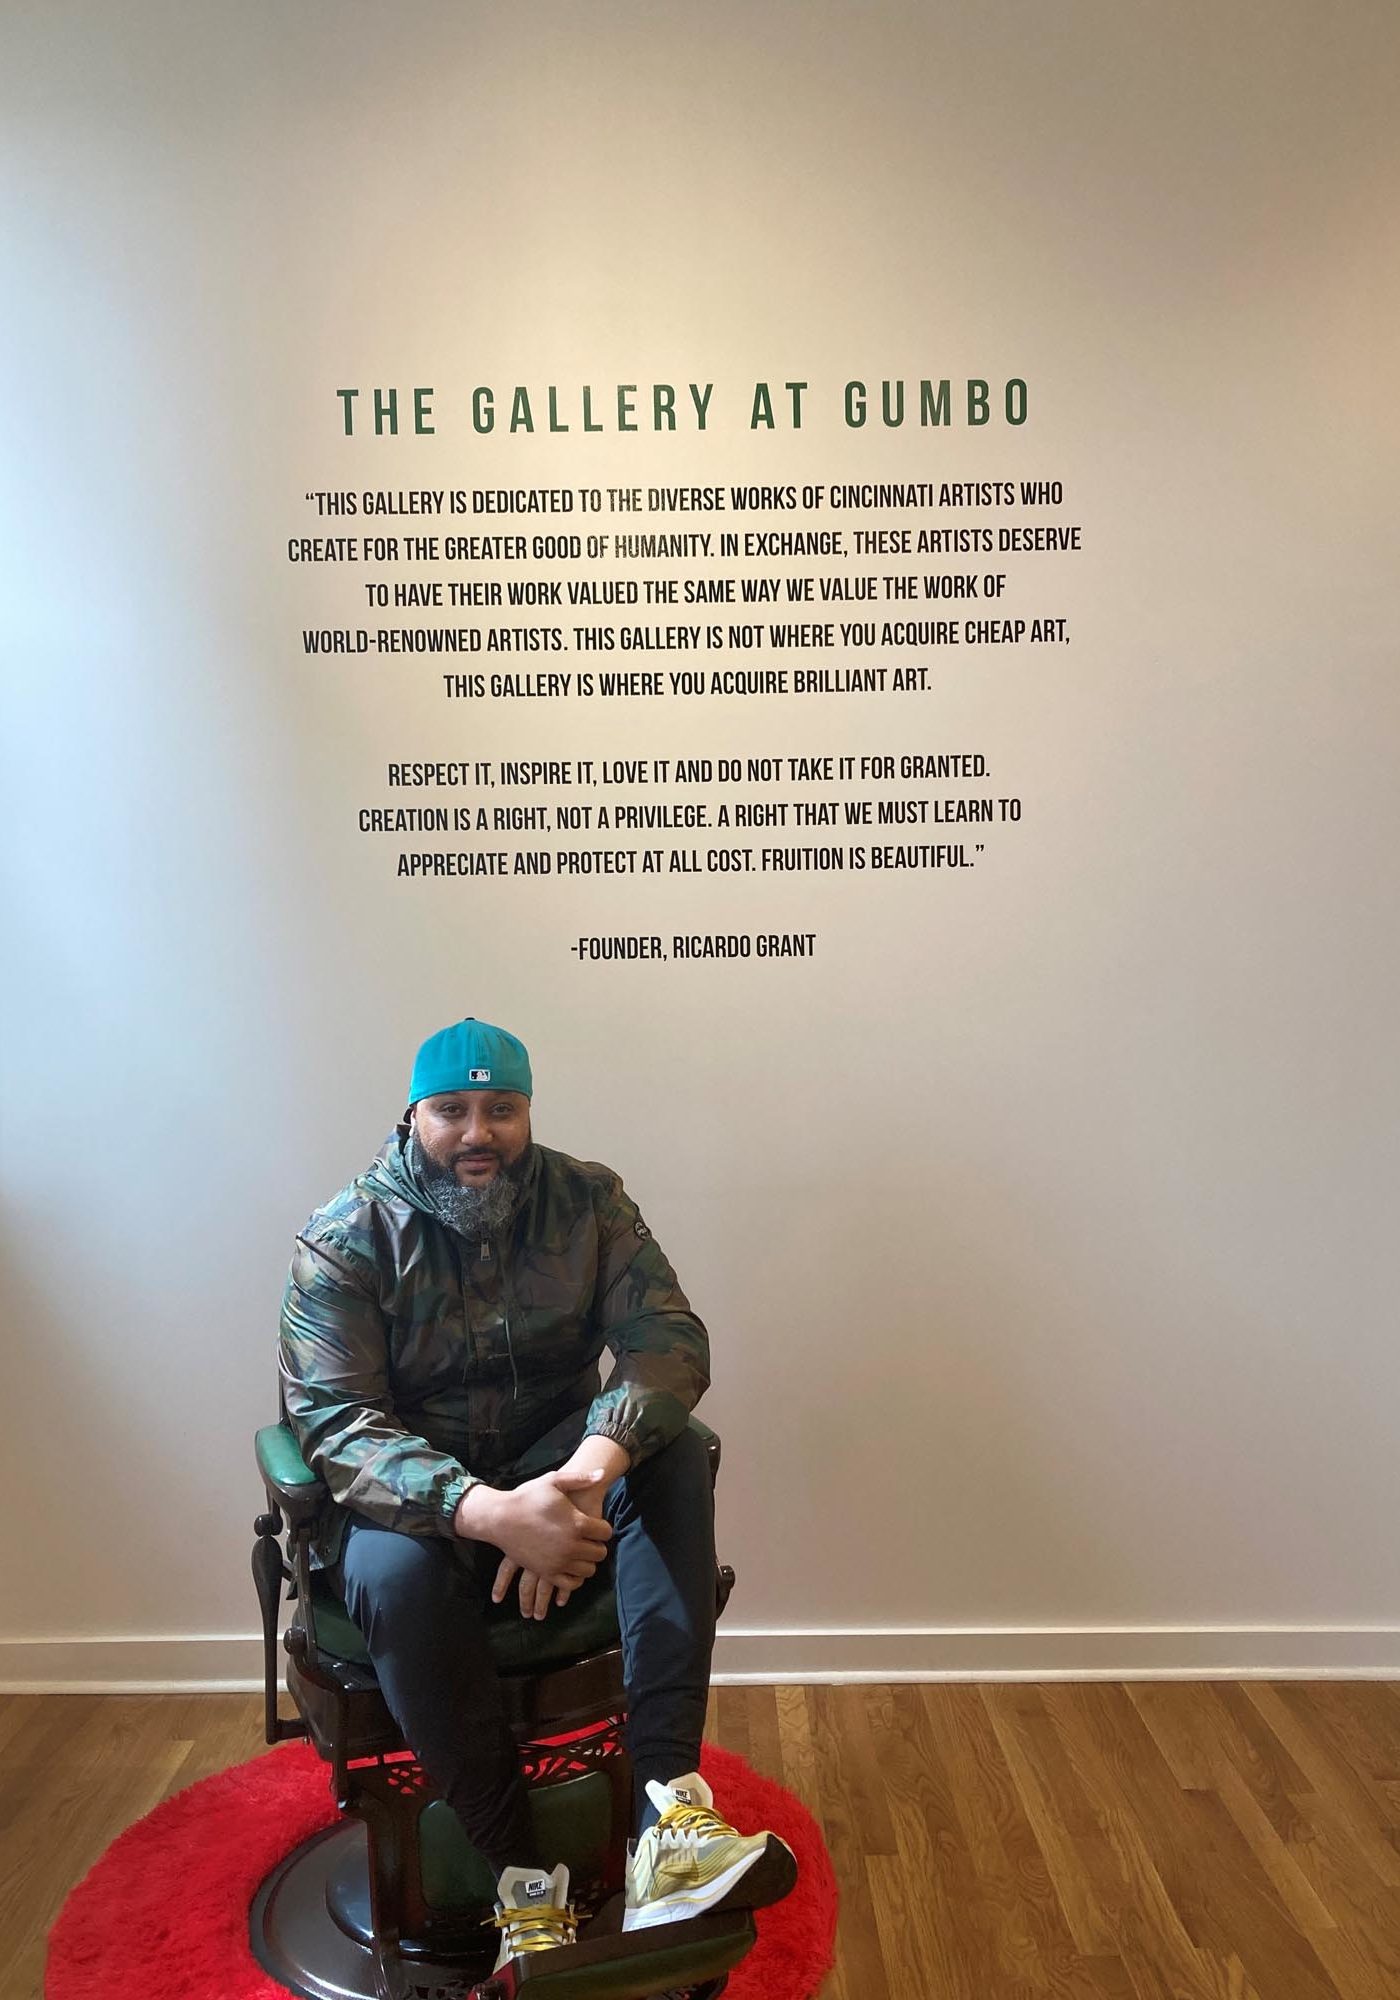 RICO GRANT, OWNER OF <a href="https://galleryatgumbo.com/" target="_blank" rel="noopener">GALLERY AT GUMBO</a> AND <a href="https://www.instagram.com/cinemaotr/" target="_blank" rel="noopener">CINEMA OTR</a> (COMING SOON)